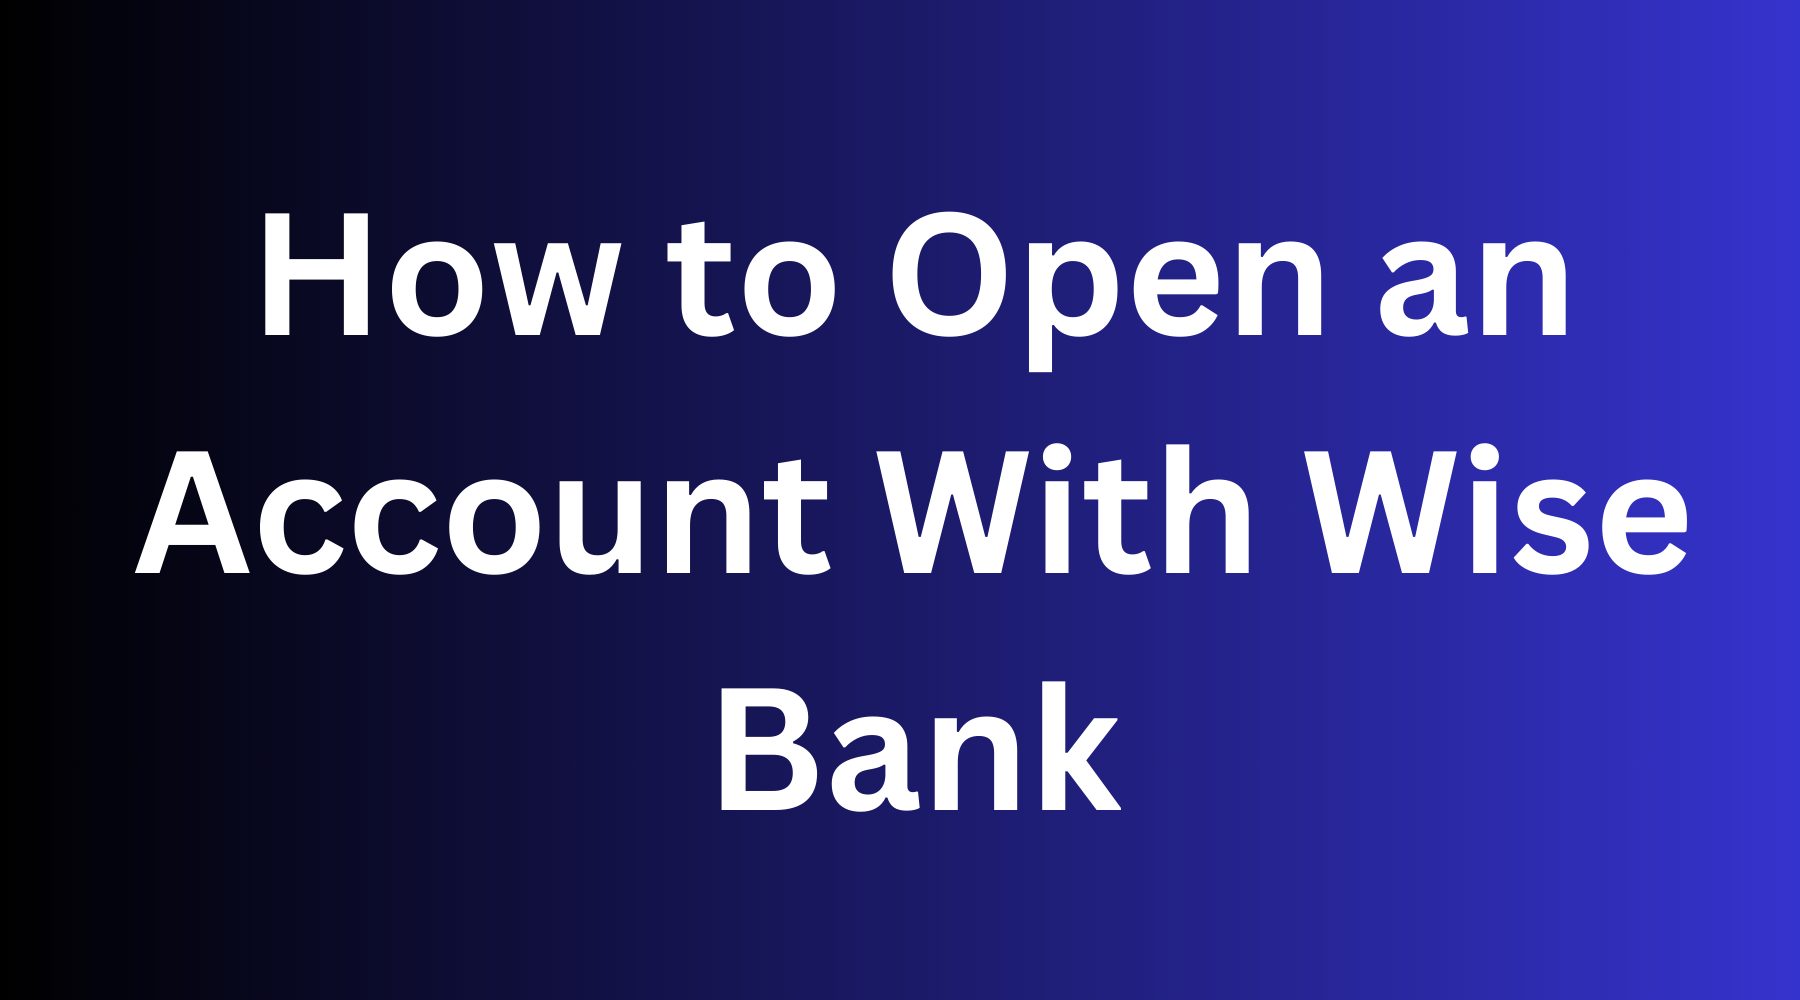 How to Open an Account With Wise Bank